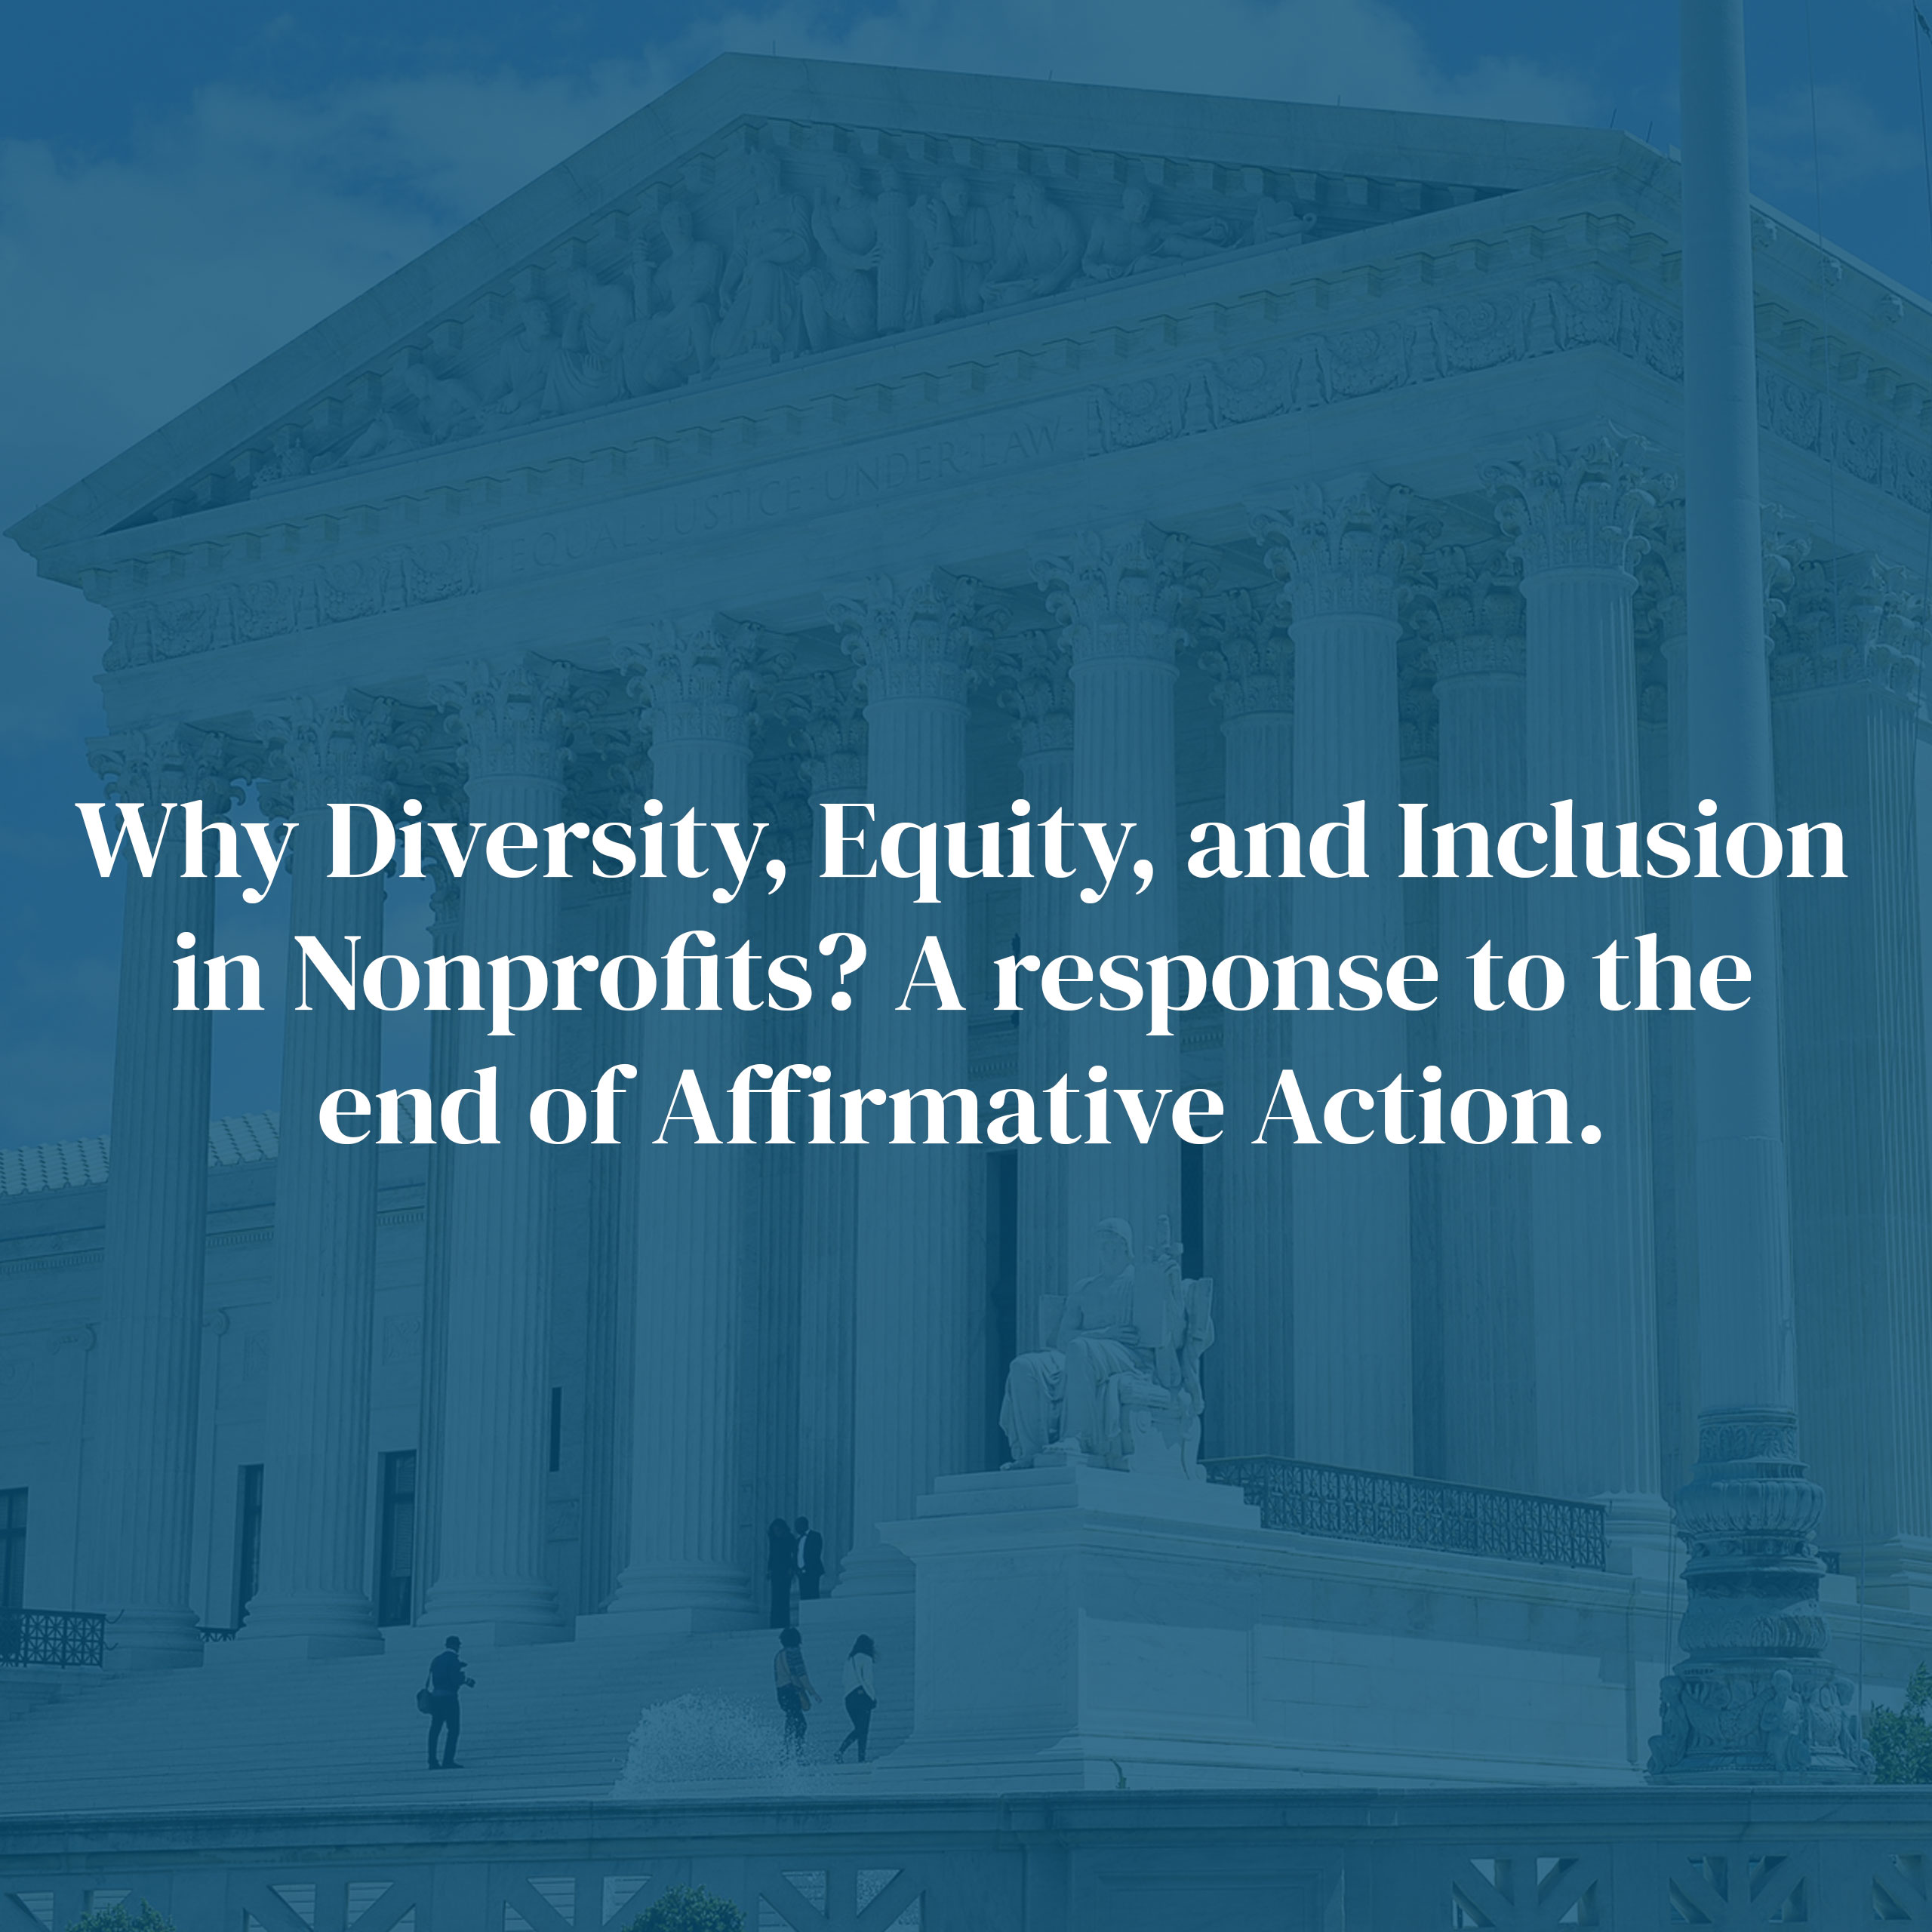 Why Diversity, Equity, and Inclusion in Nonprofits? A response to the end of Affirmative Action.